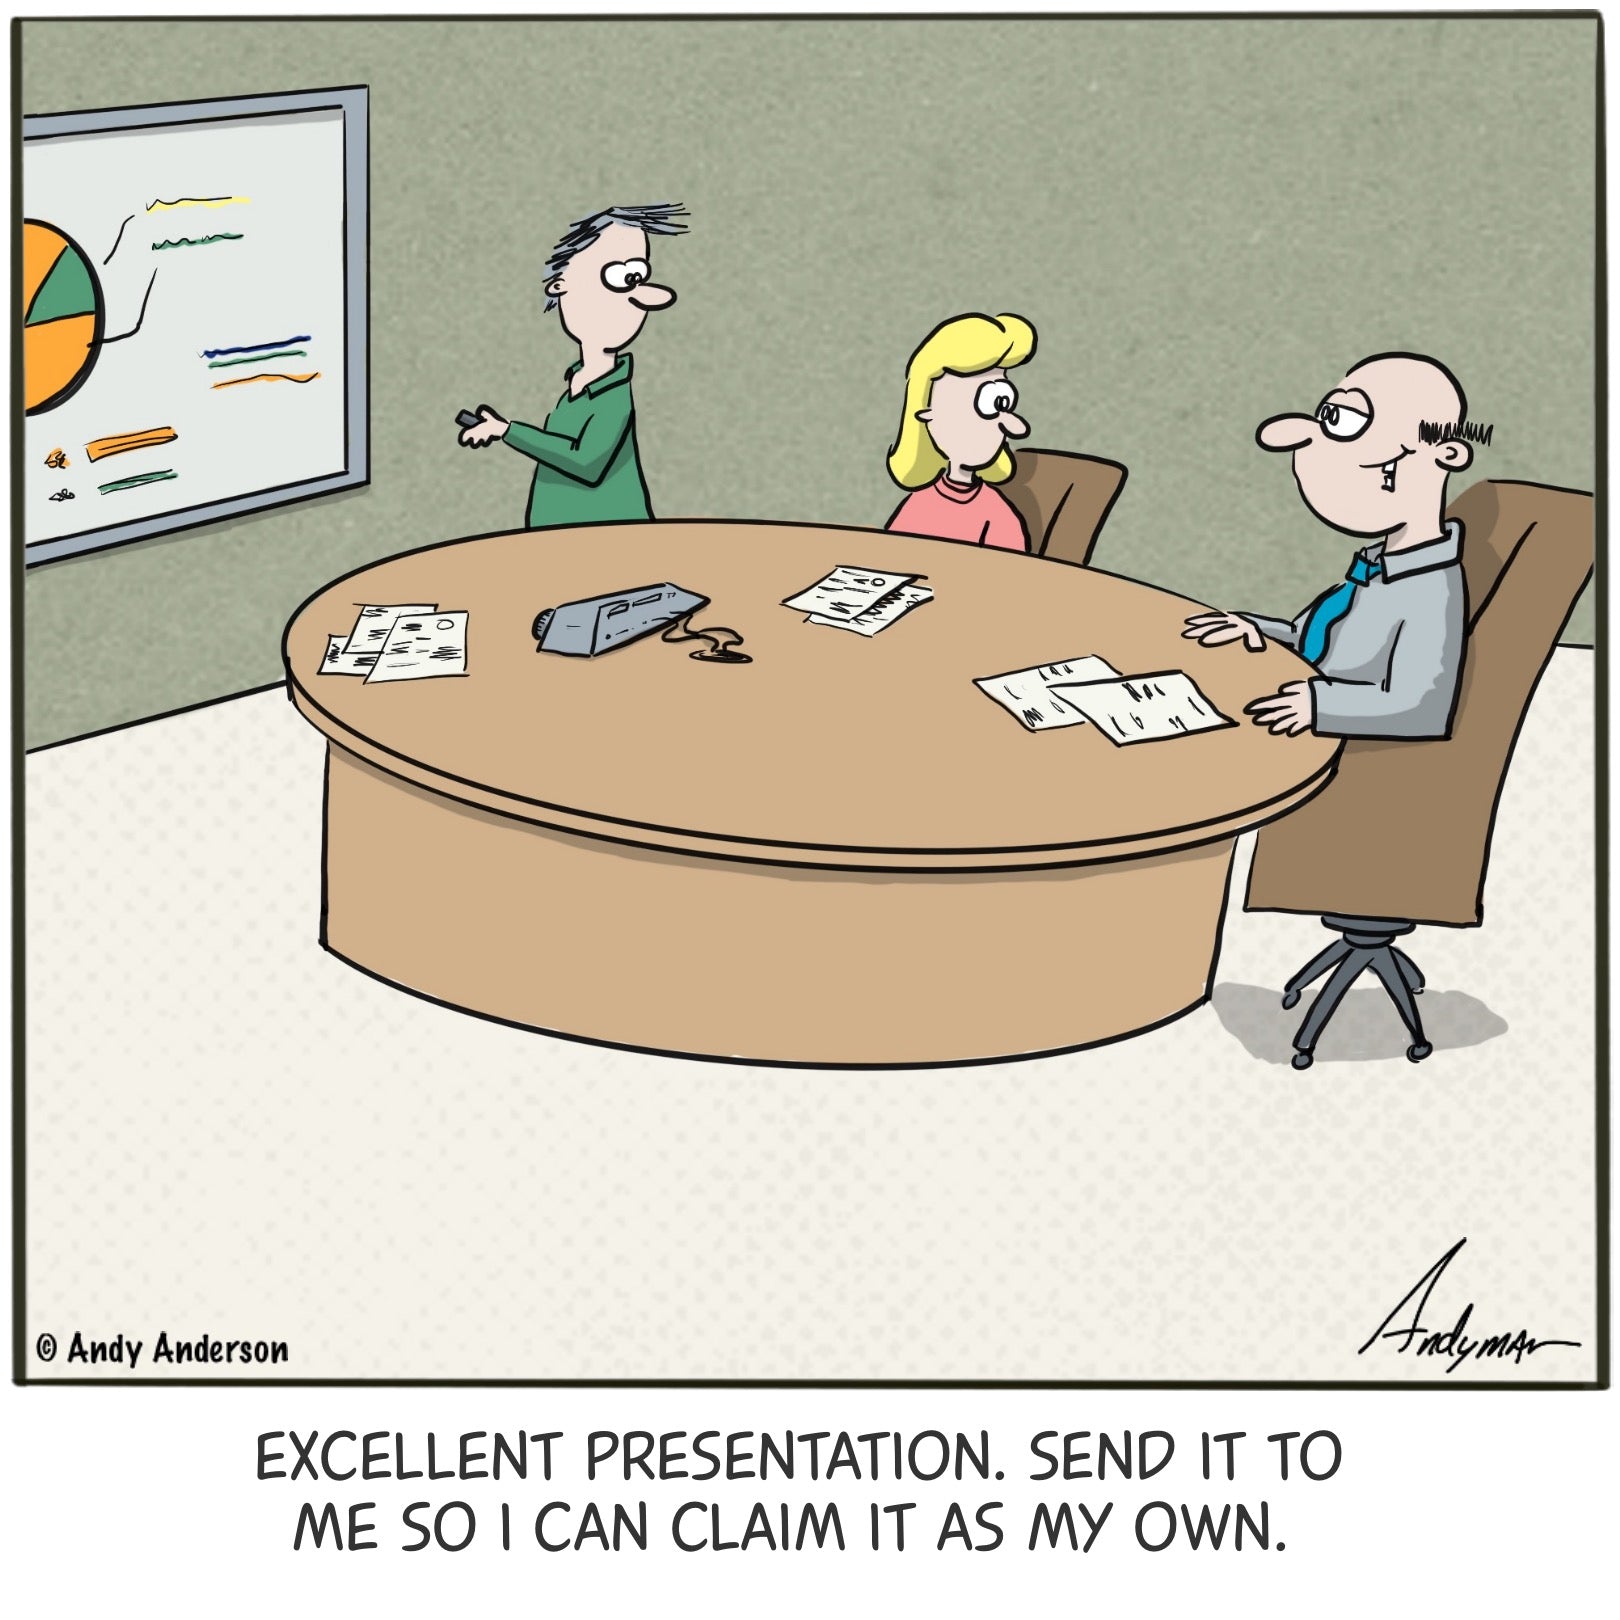 Cartoon about boss taking credit for employee's presentation by Andy Anderson